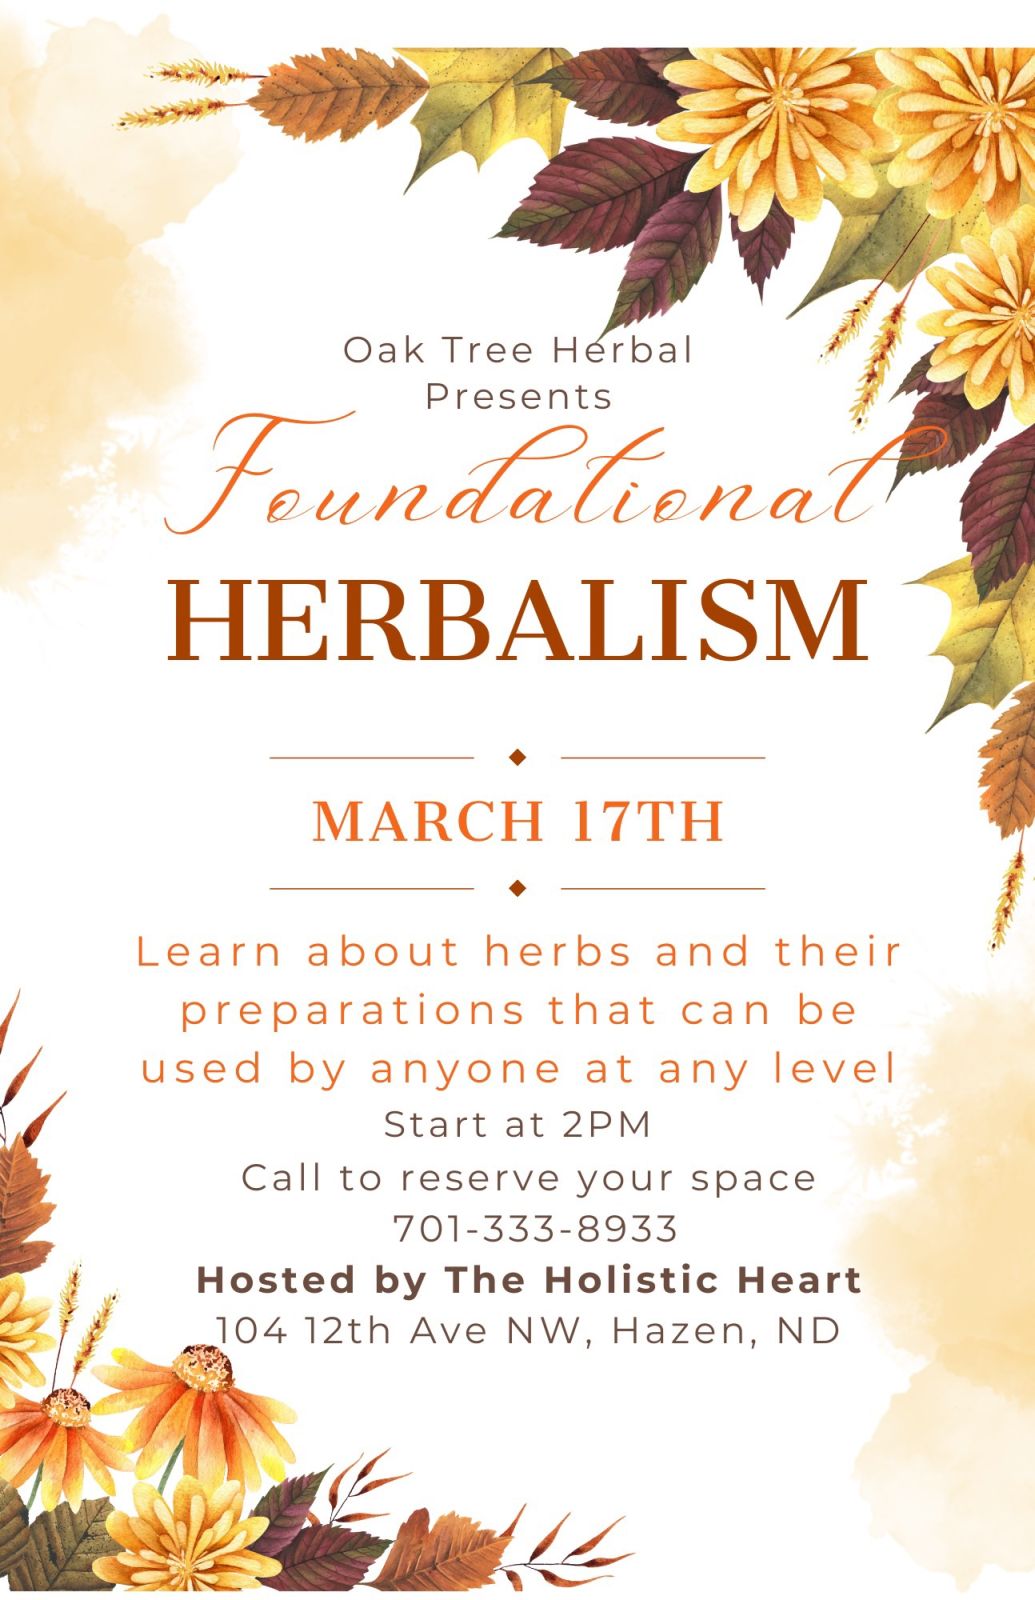 Event Promo Photo For Foundational Herbalism